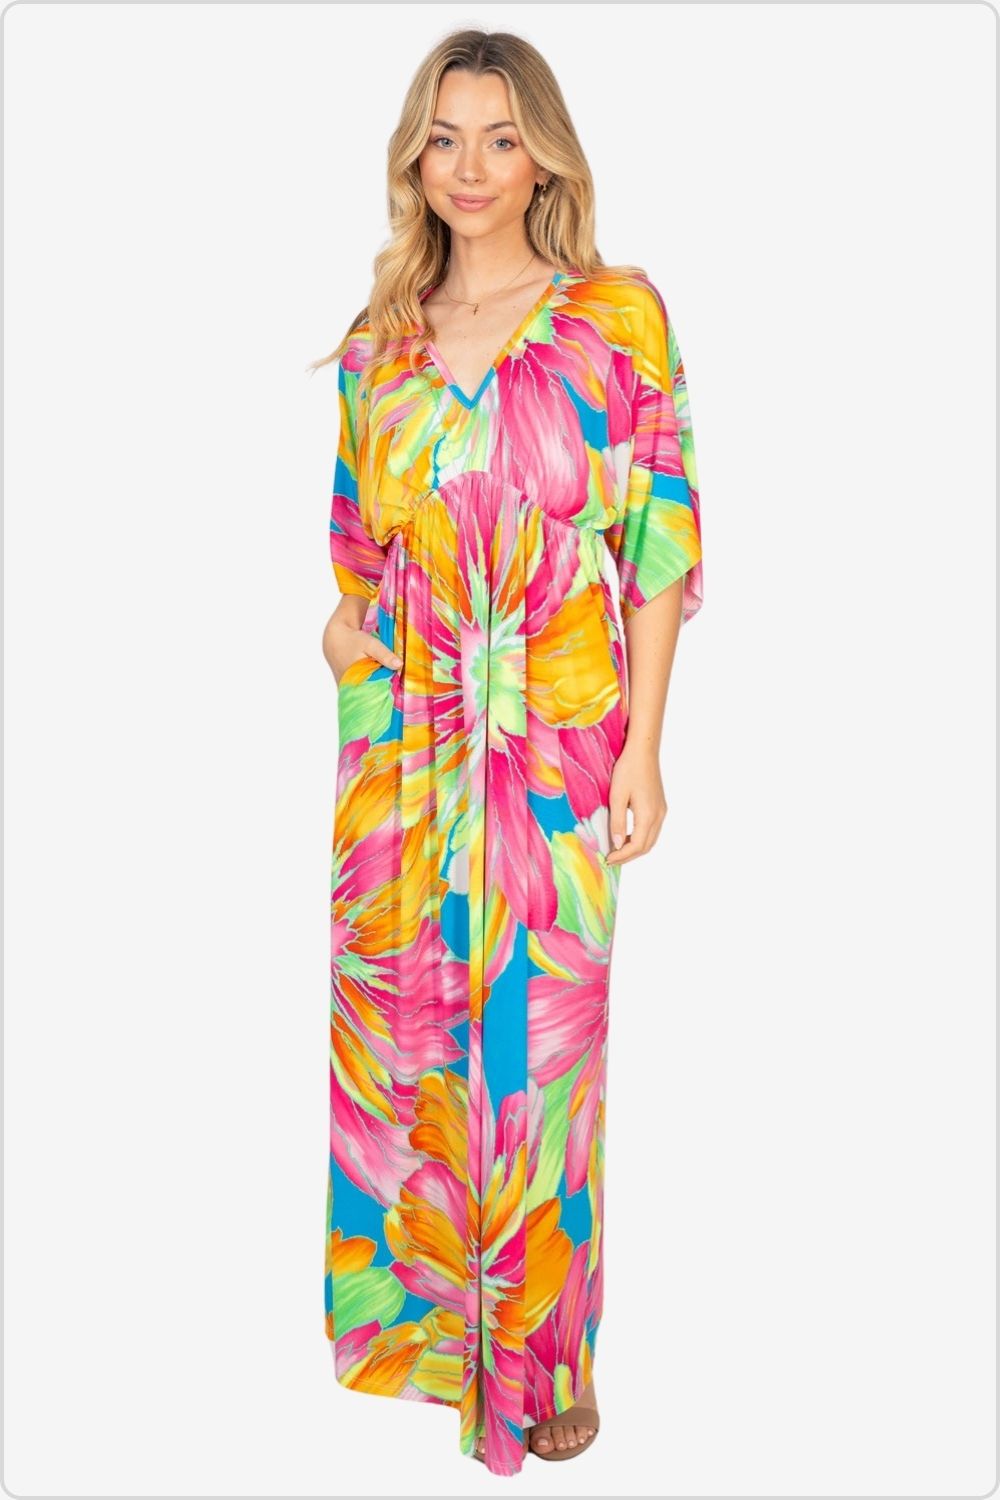 Elegant Printed V-Neck Maxi Dress Front View with Pockets.